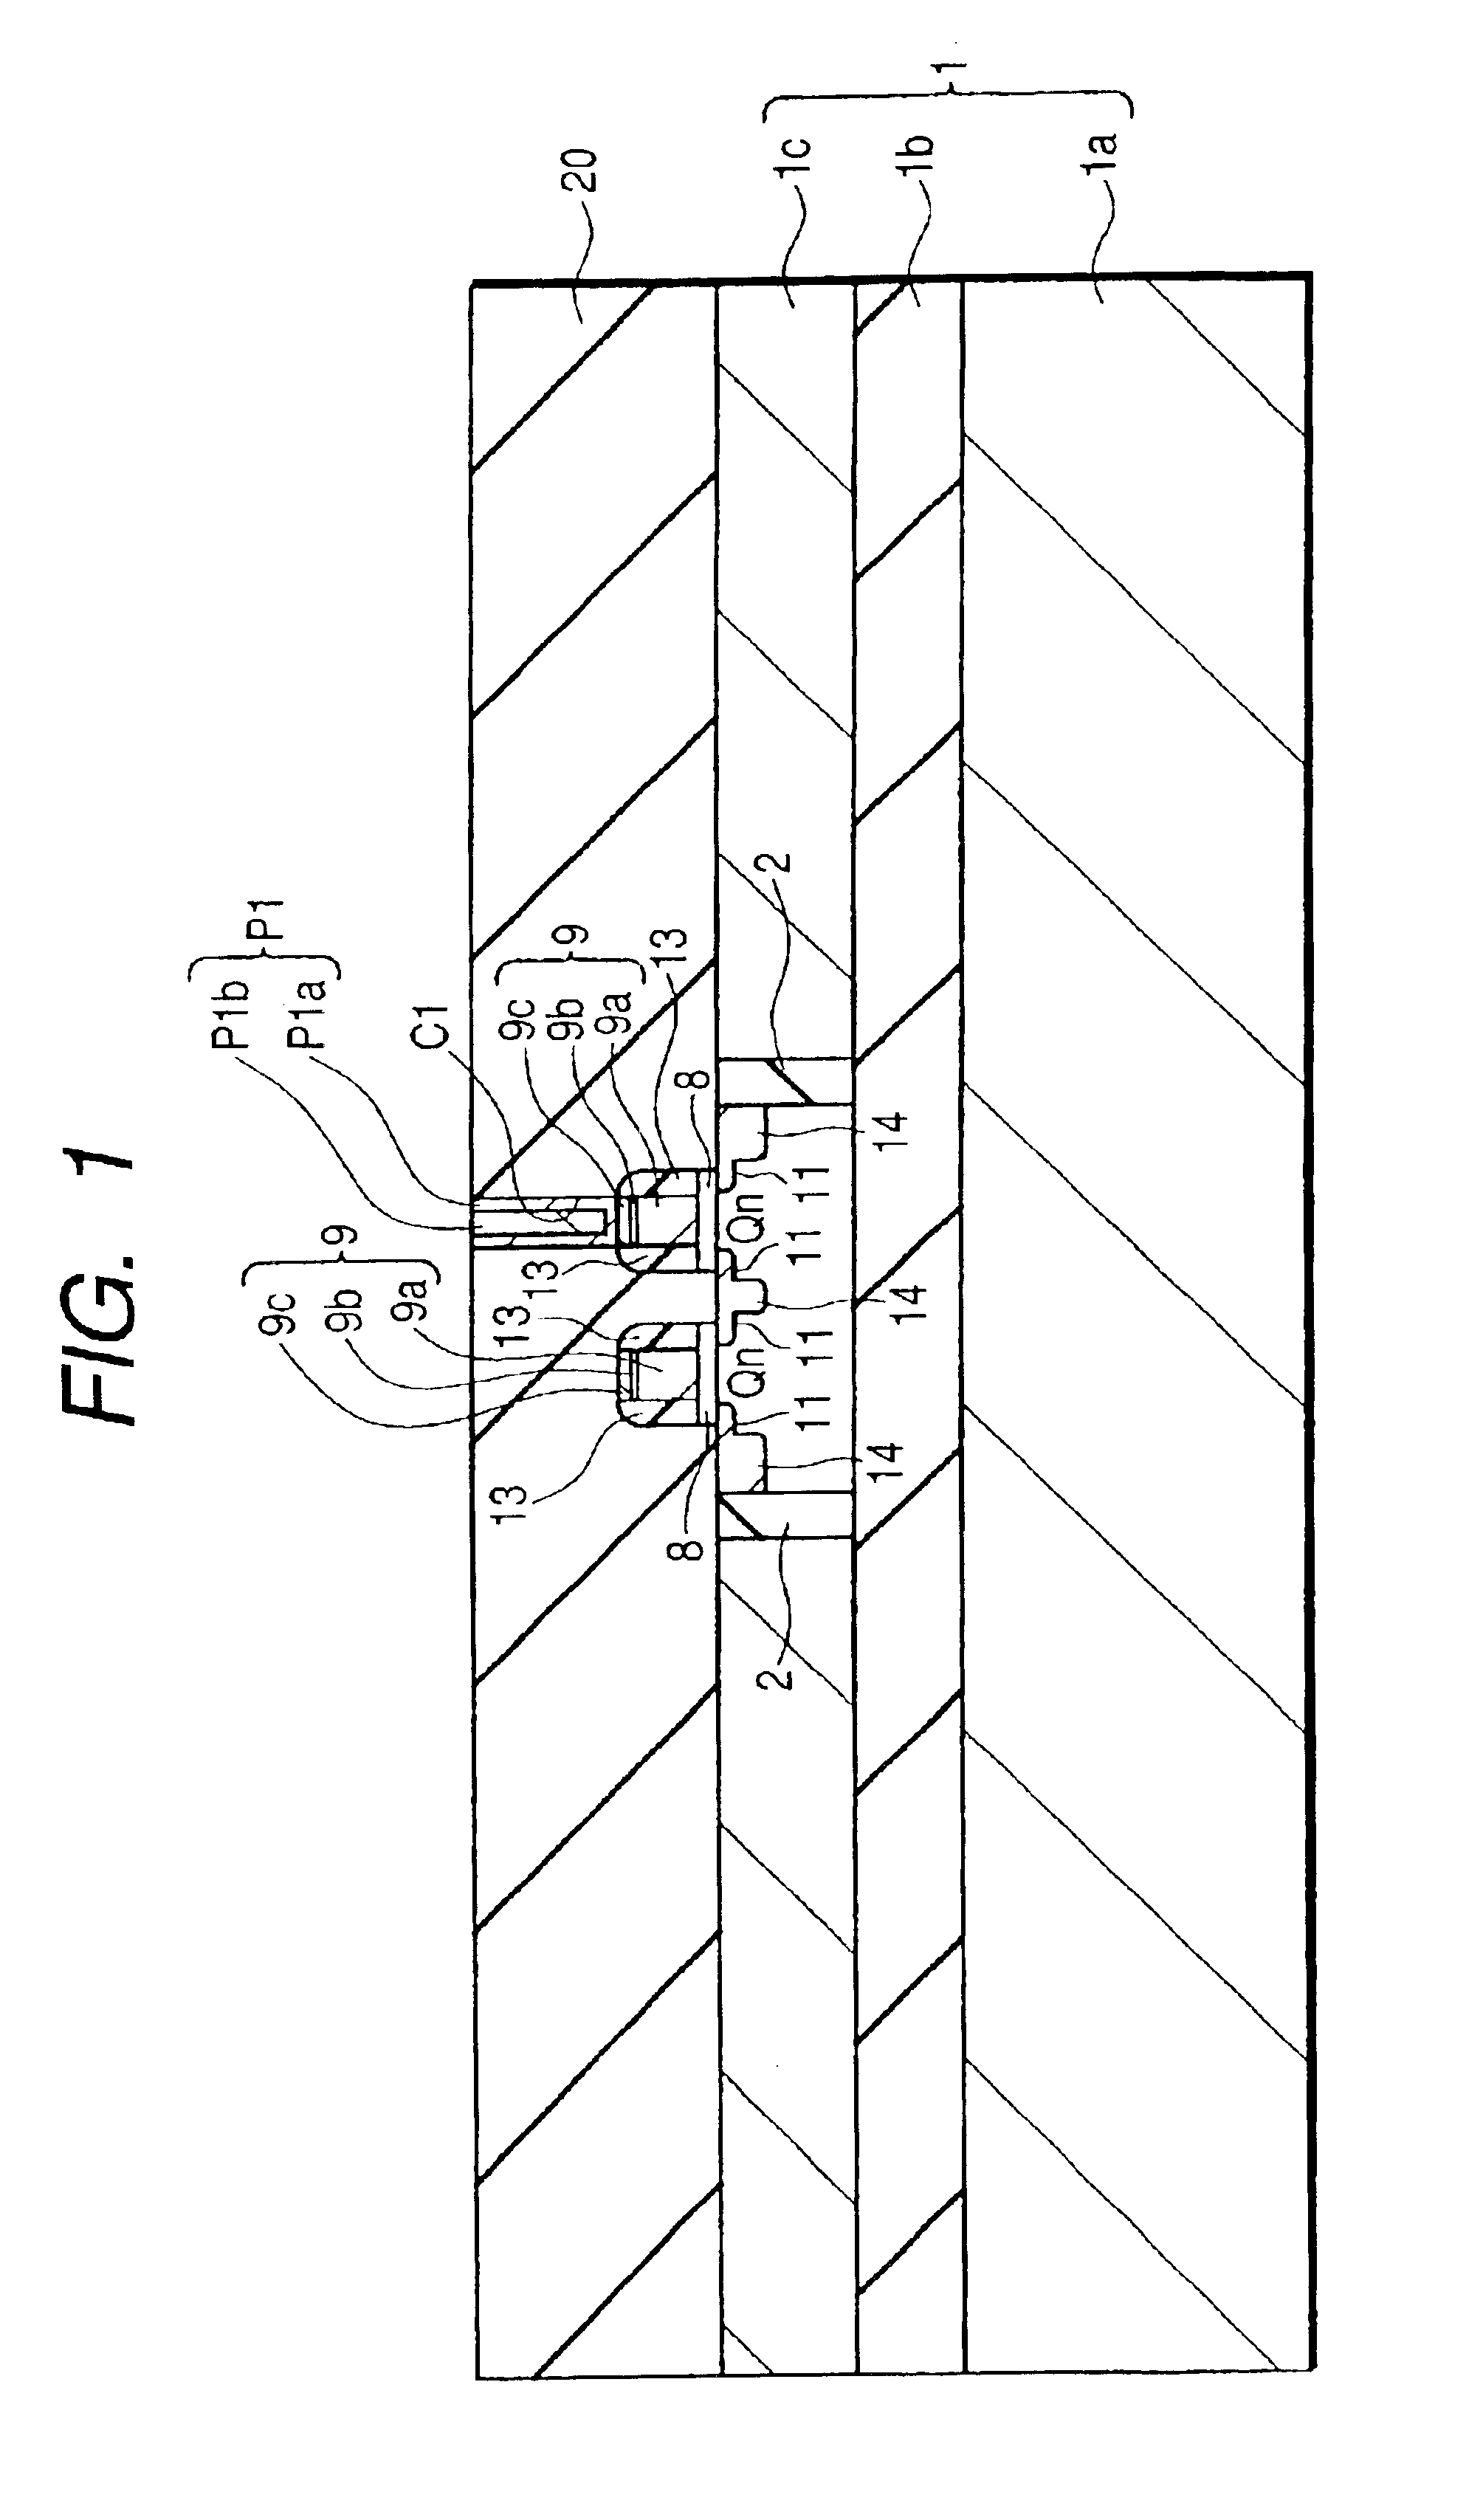 Method of manufacturing a semiconductor device having an interconnect embedded in an insulating film